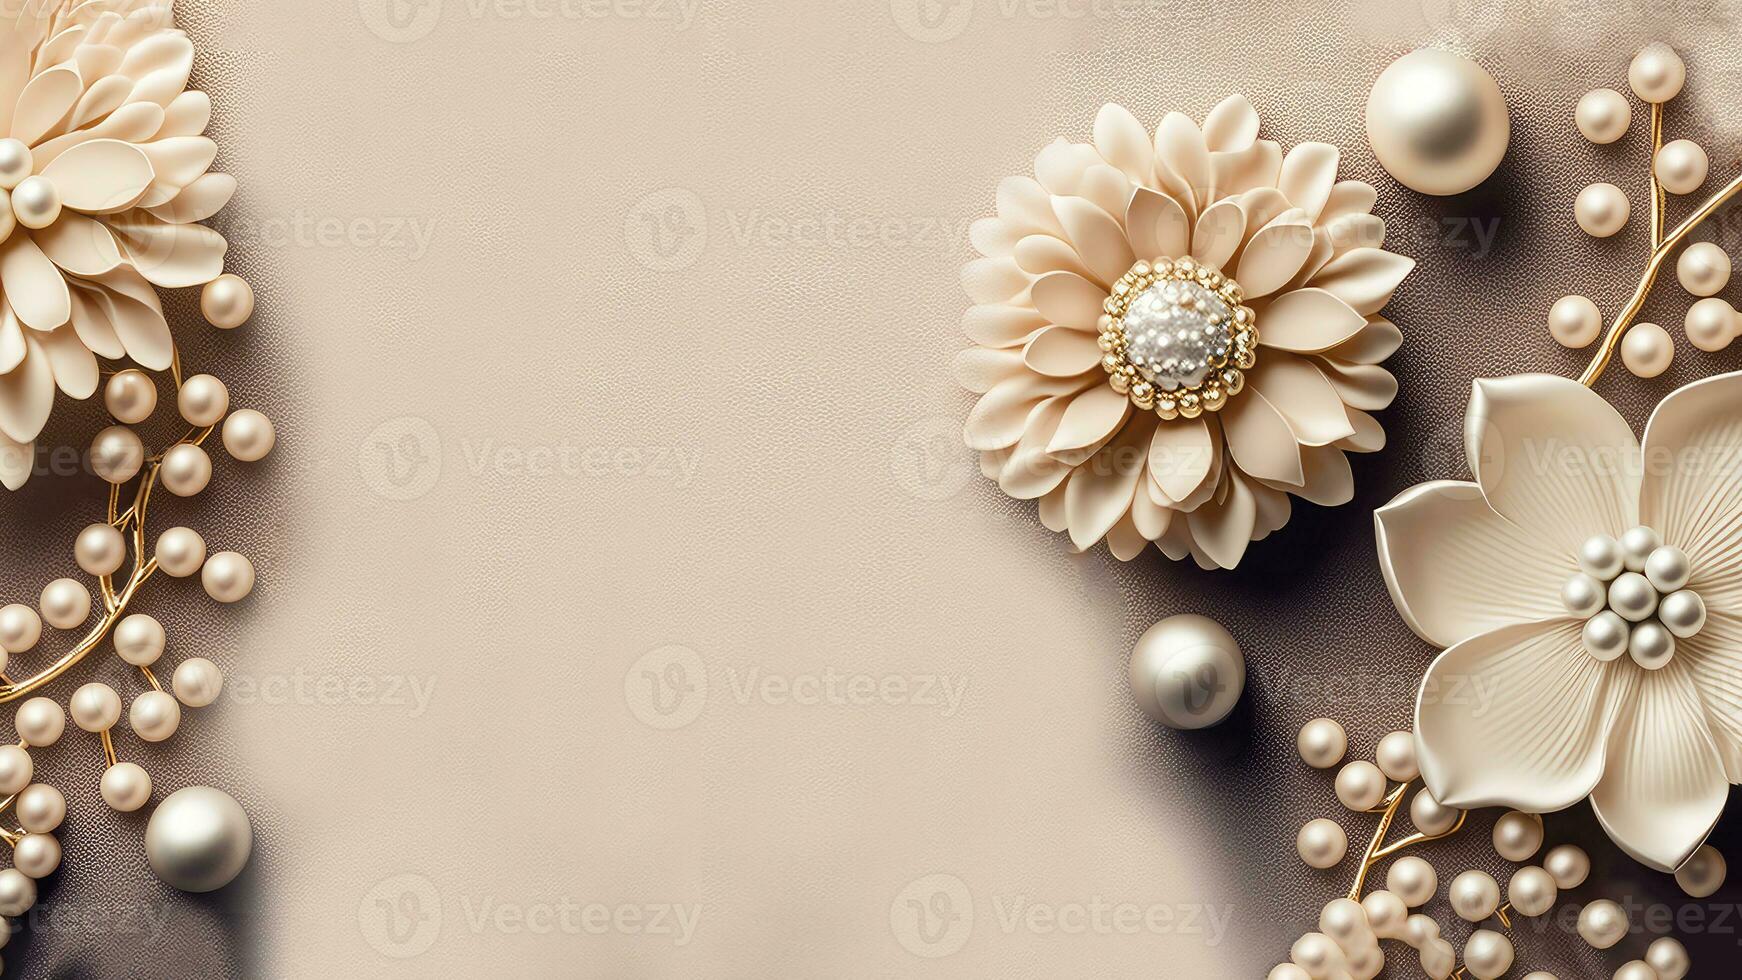 3D Render of Pastel Brown Flowers And Pearls Decorative Background And Copy Space. photo